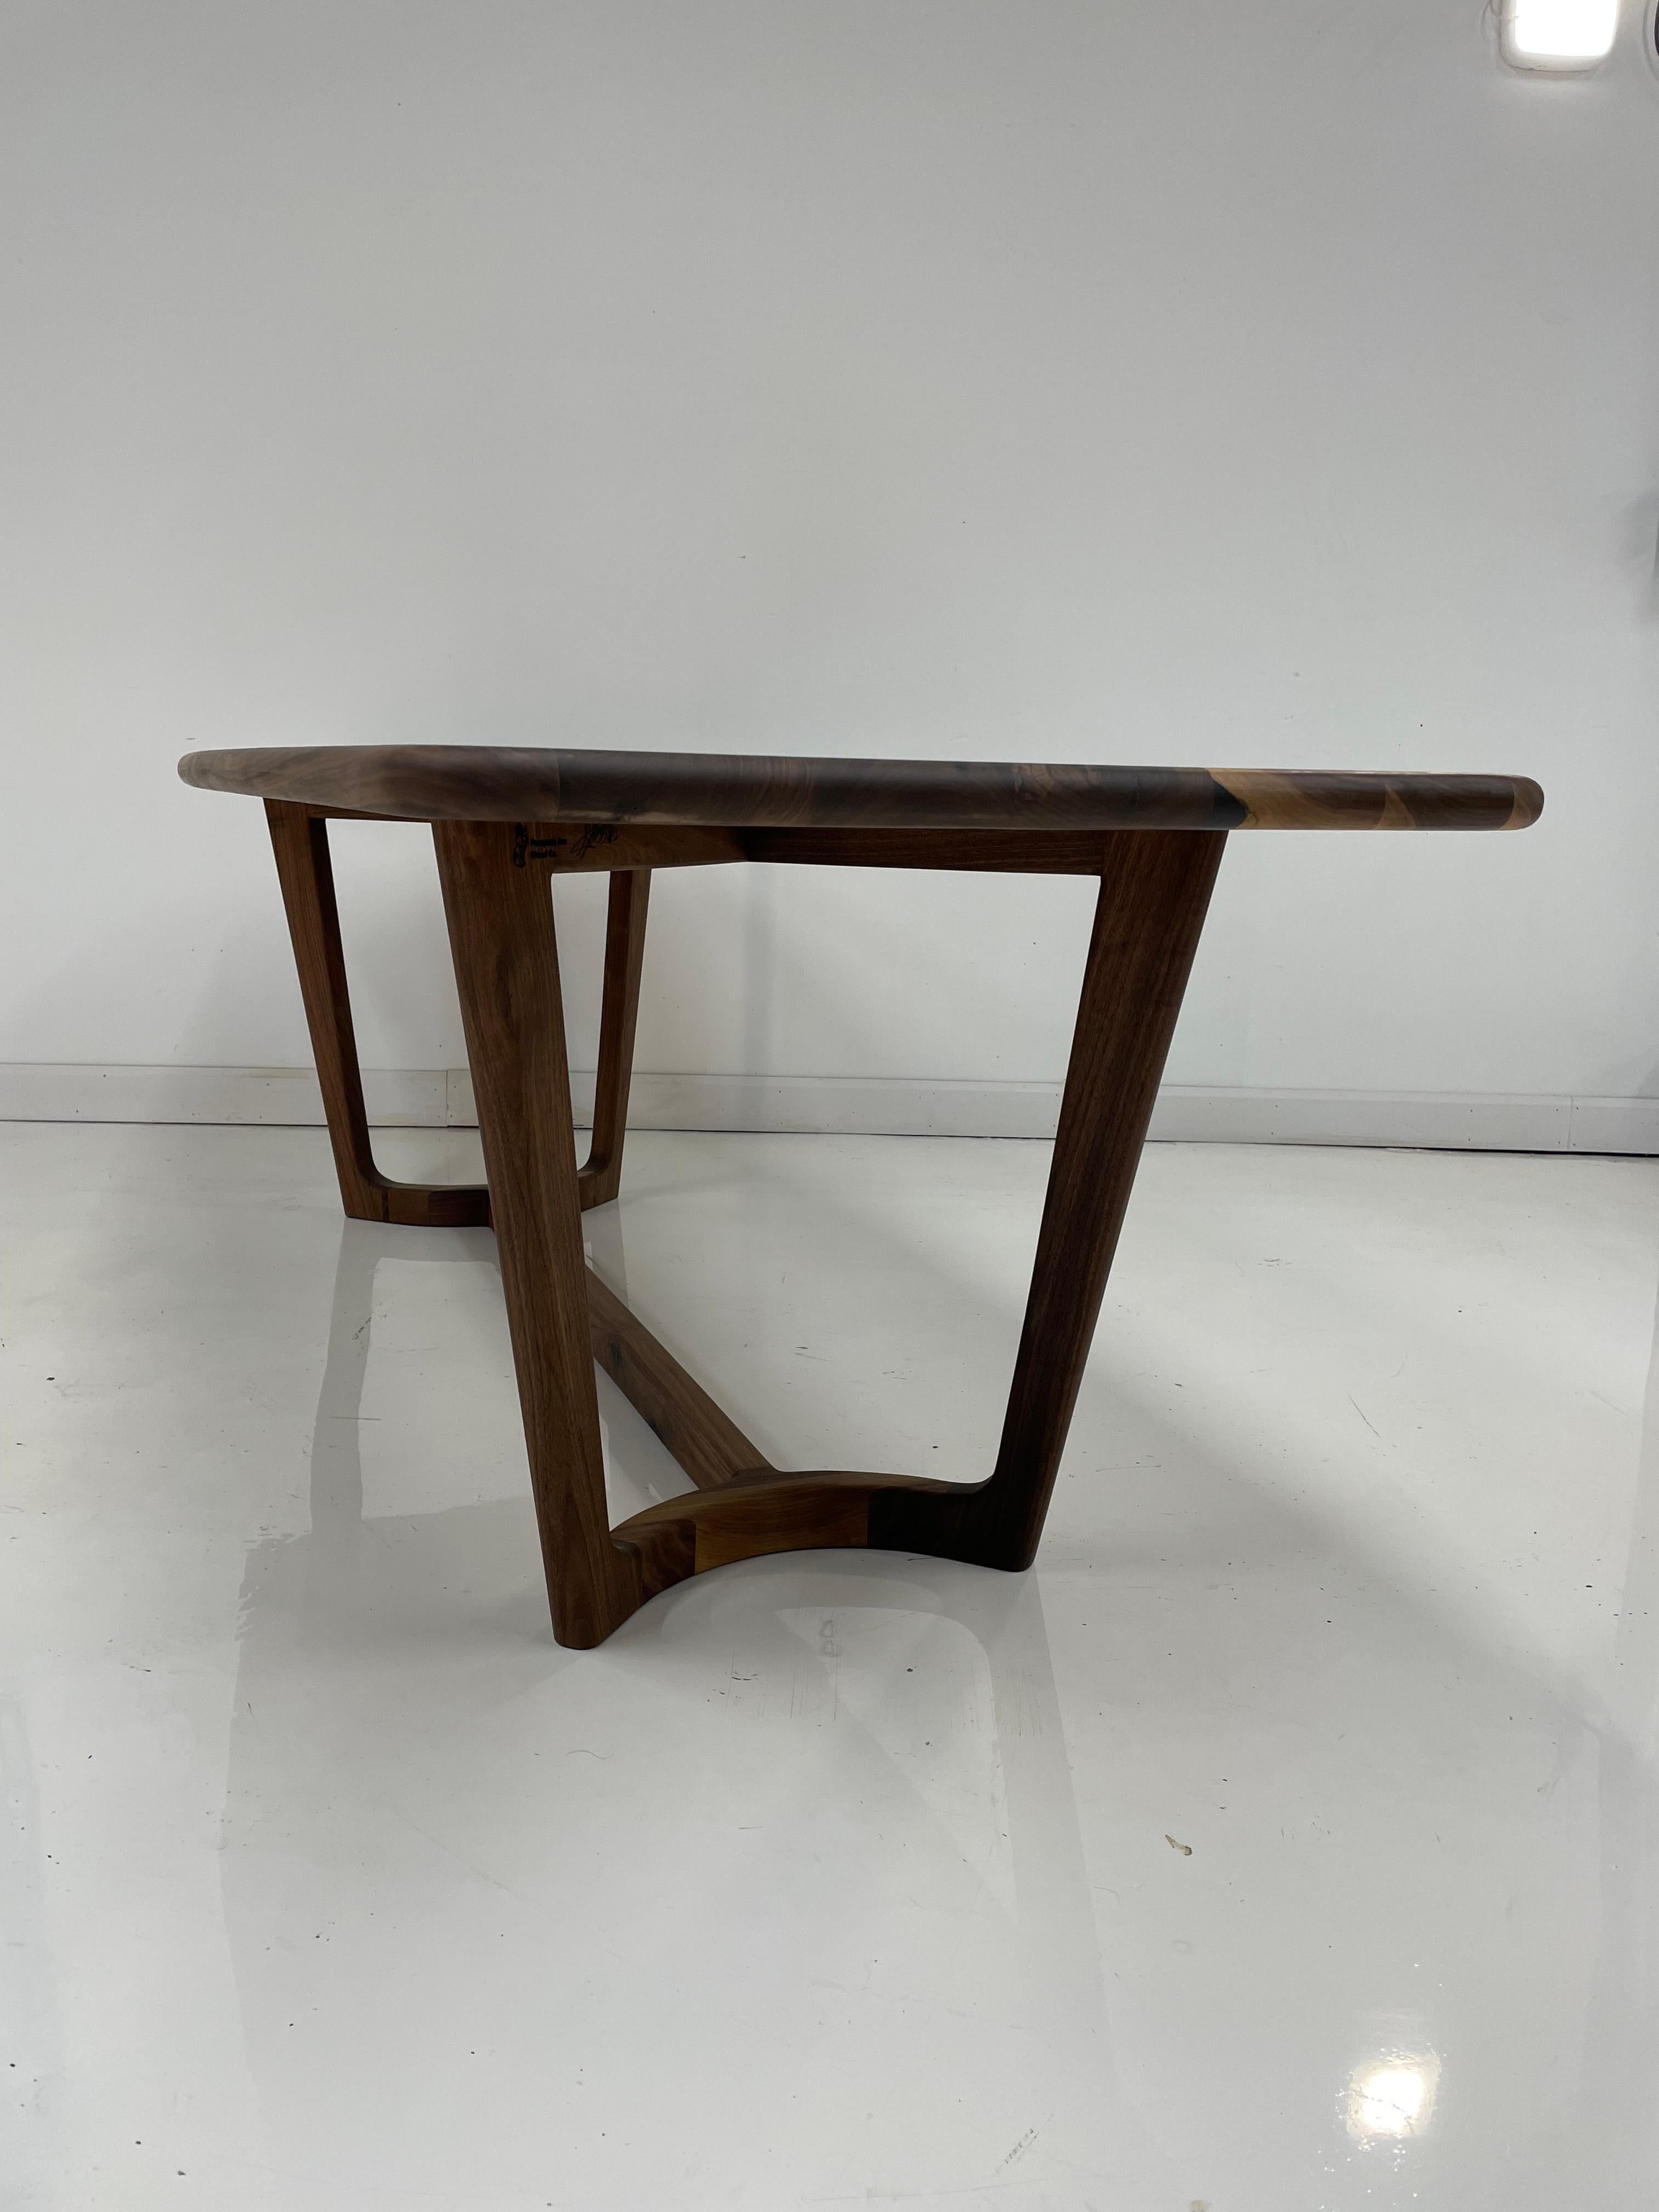 Modern Walnut Hilda Dining Table From The Signature Series By Pompous Fox In New Condition For Sale In Barrie, ON